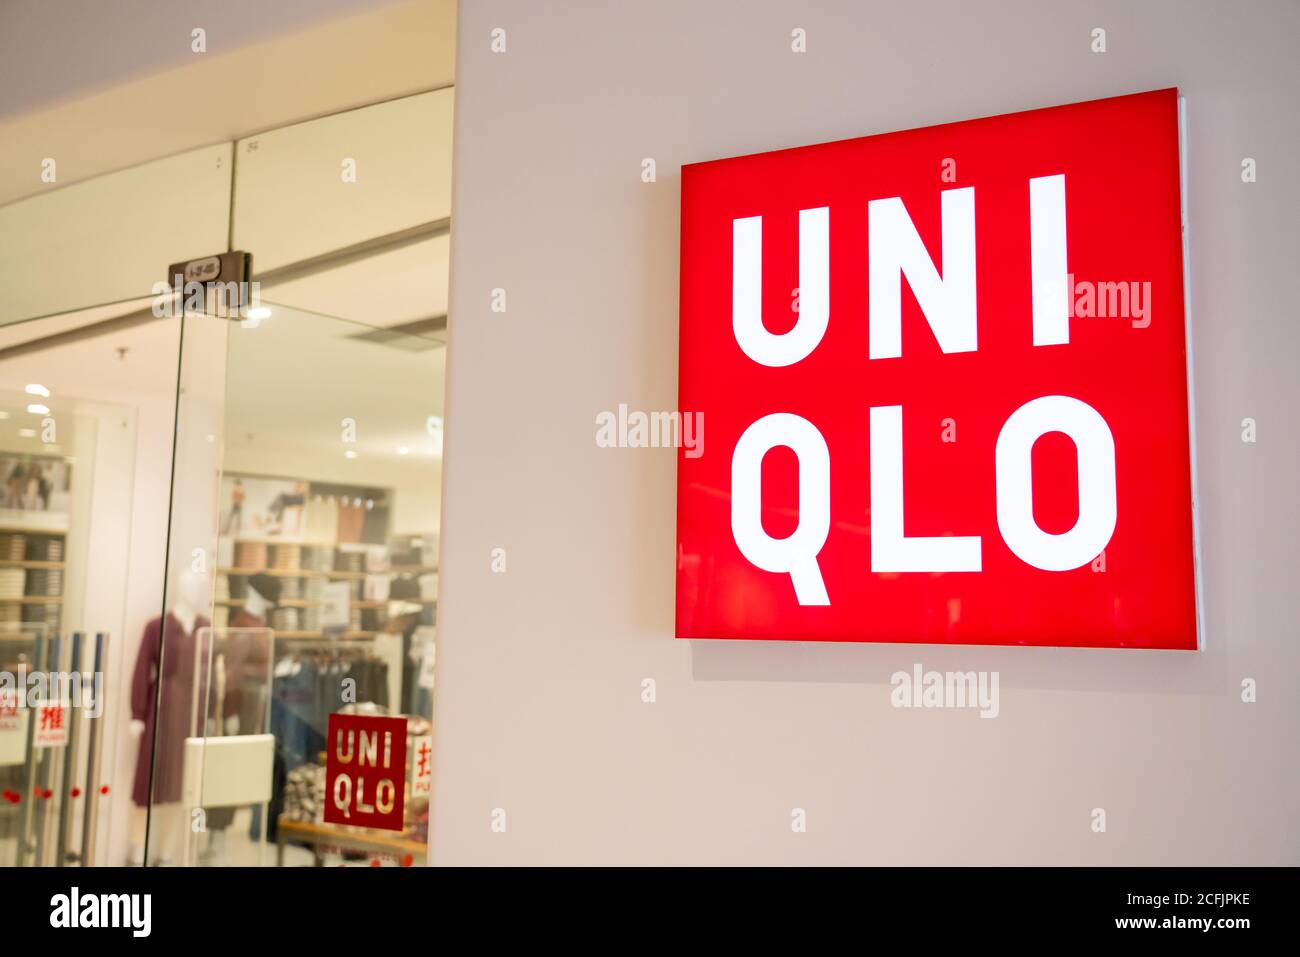 Japanese casual wear designer and manufacturer Uniqlo logo seen in  Shenzhen Stock Photo  Alamy